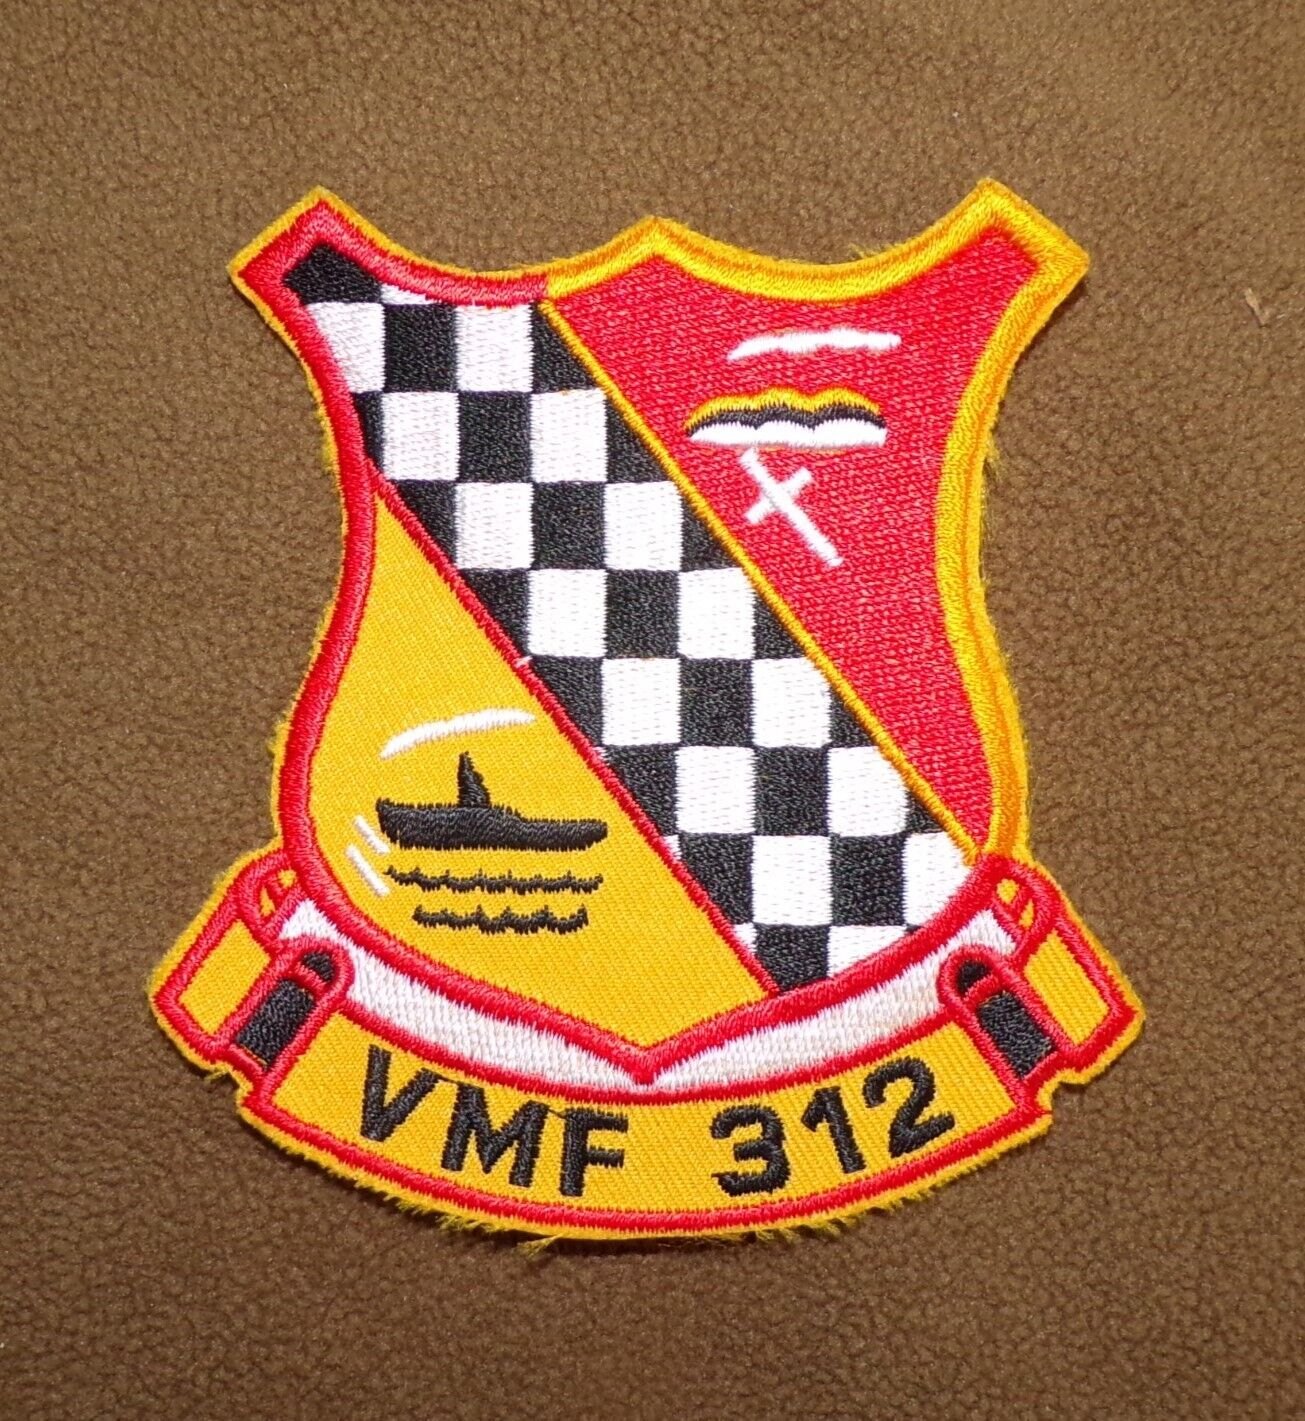 USMC VMF 312 Marine Fighter Attack Squadron Embroidered Patch